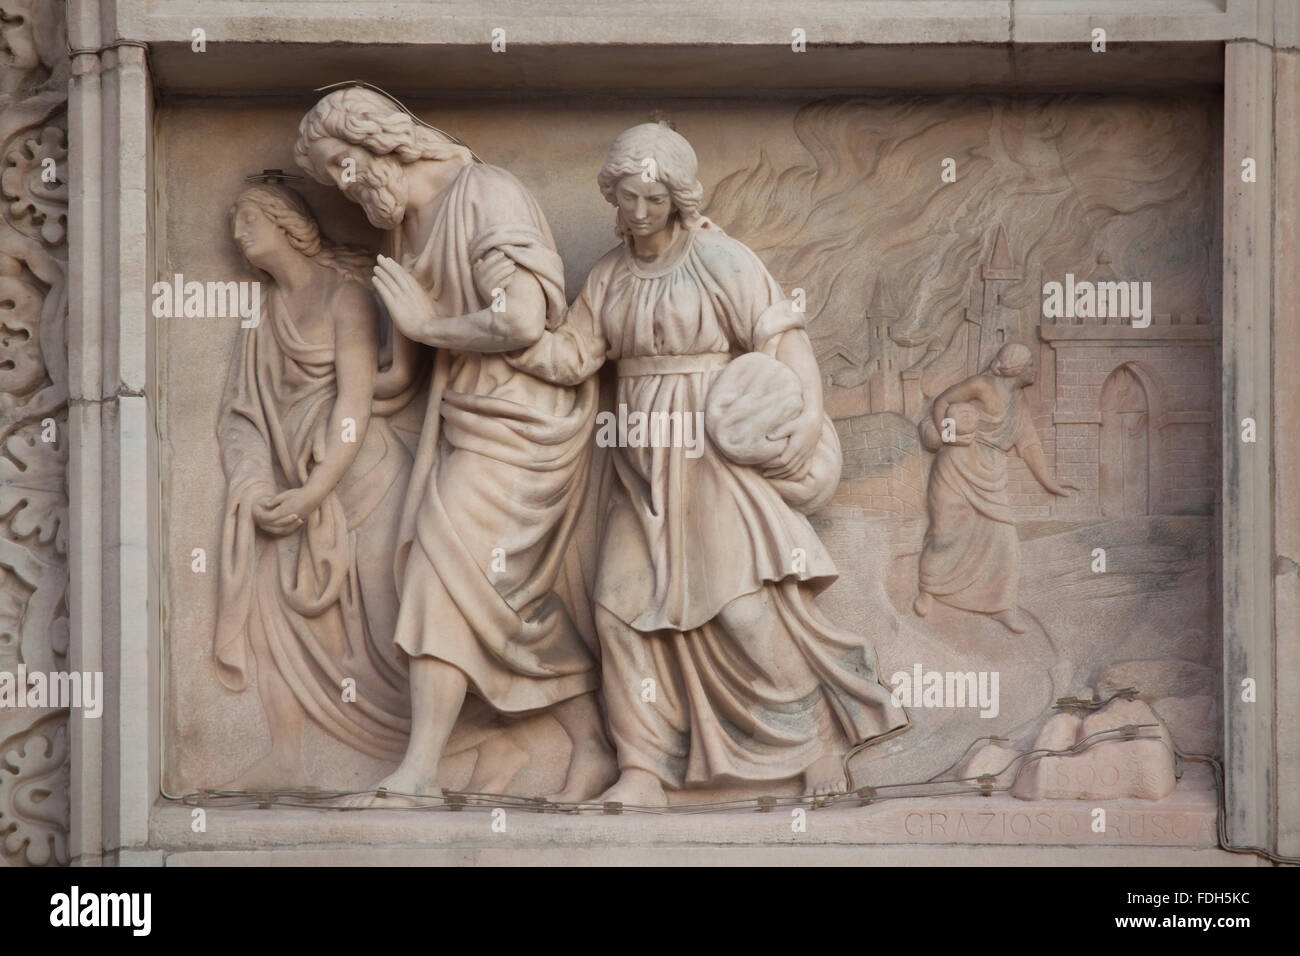 Lot and his daughters flee from Sodom. Marble relief (1800) by Italian sculptor Grazioso Rusca on the main facade of the Milan C Stock Photo